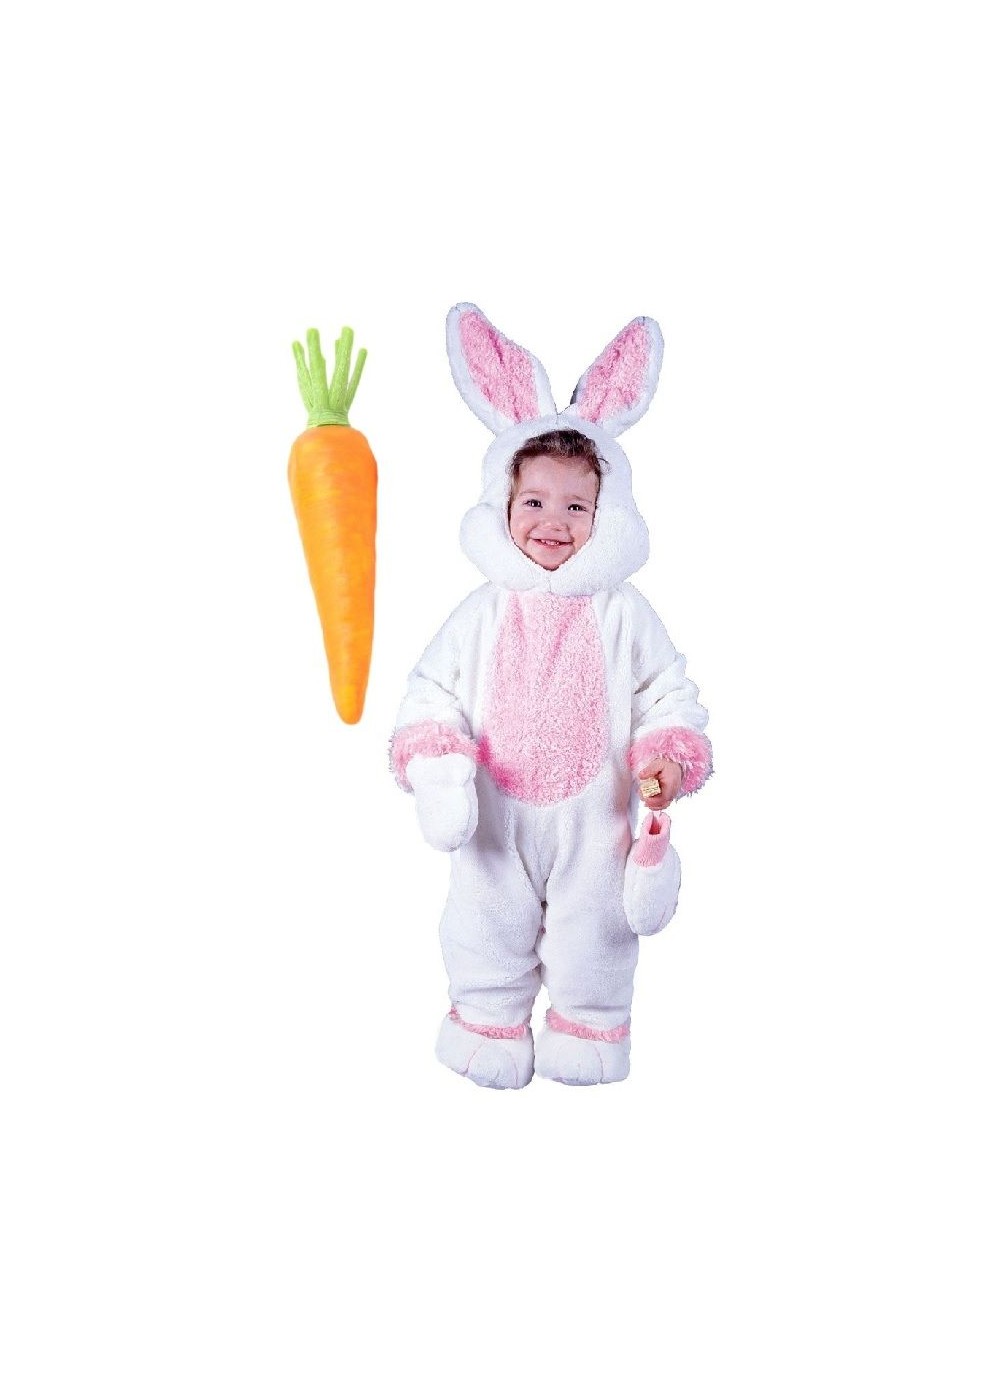 Easter Bunny Baby Boy And Carrot Prop Costume Set